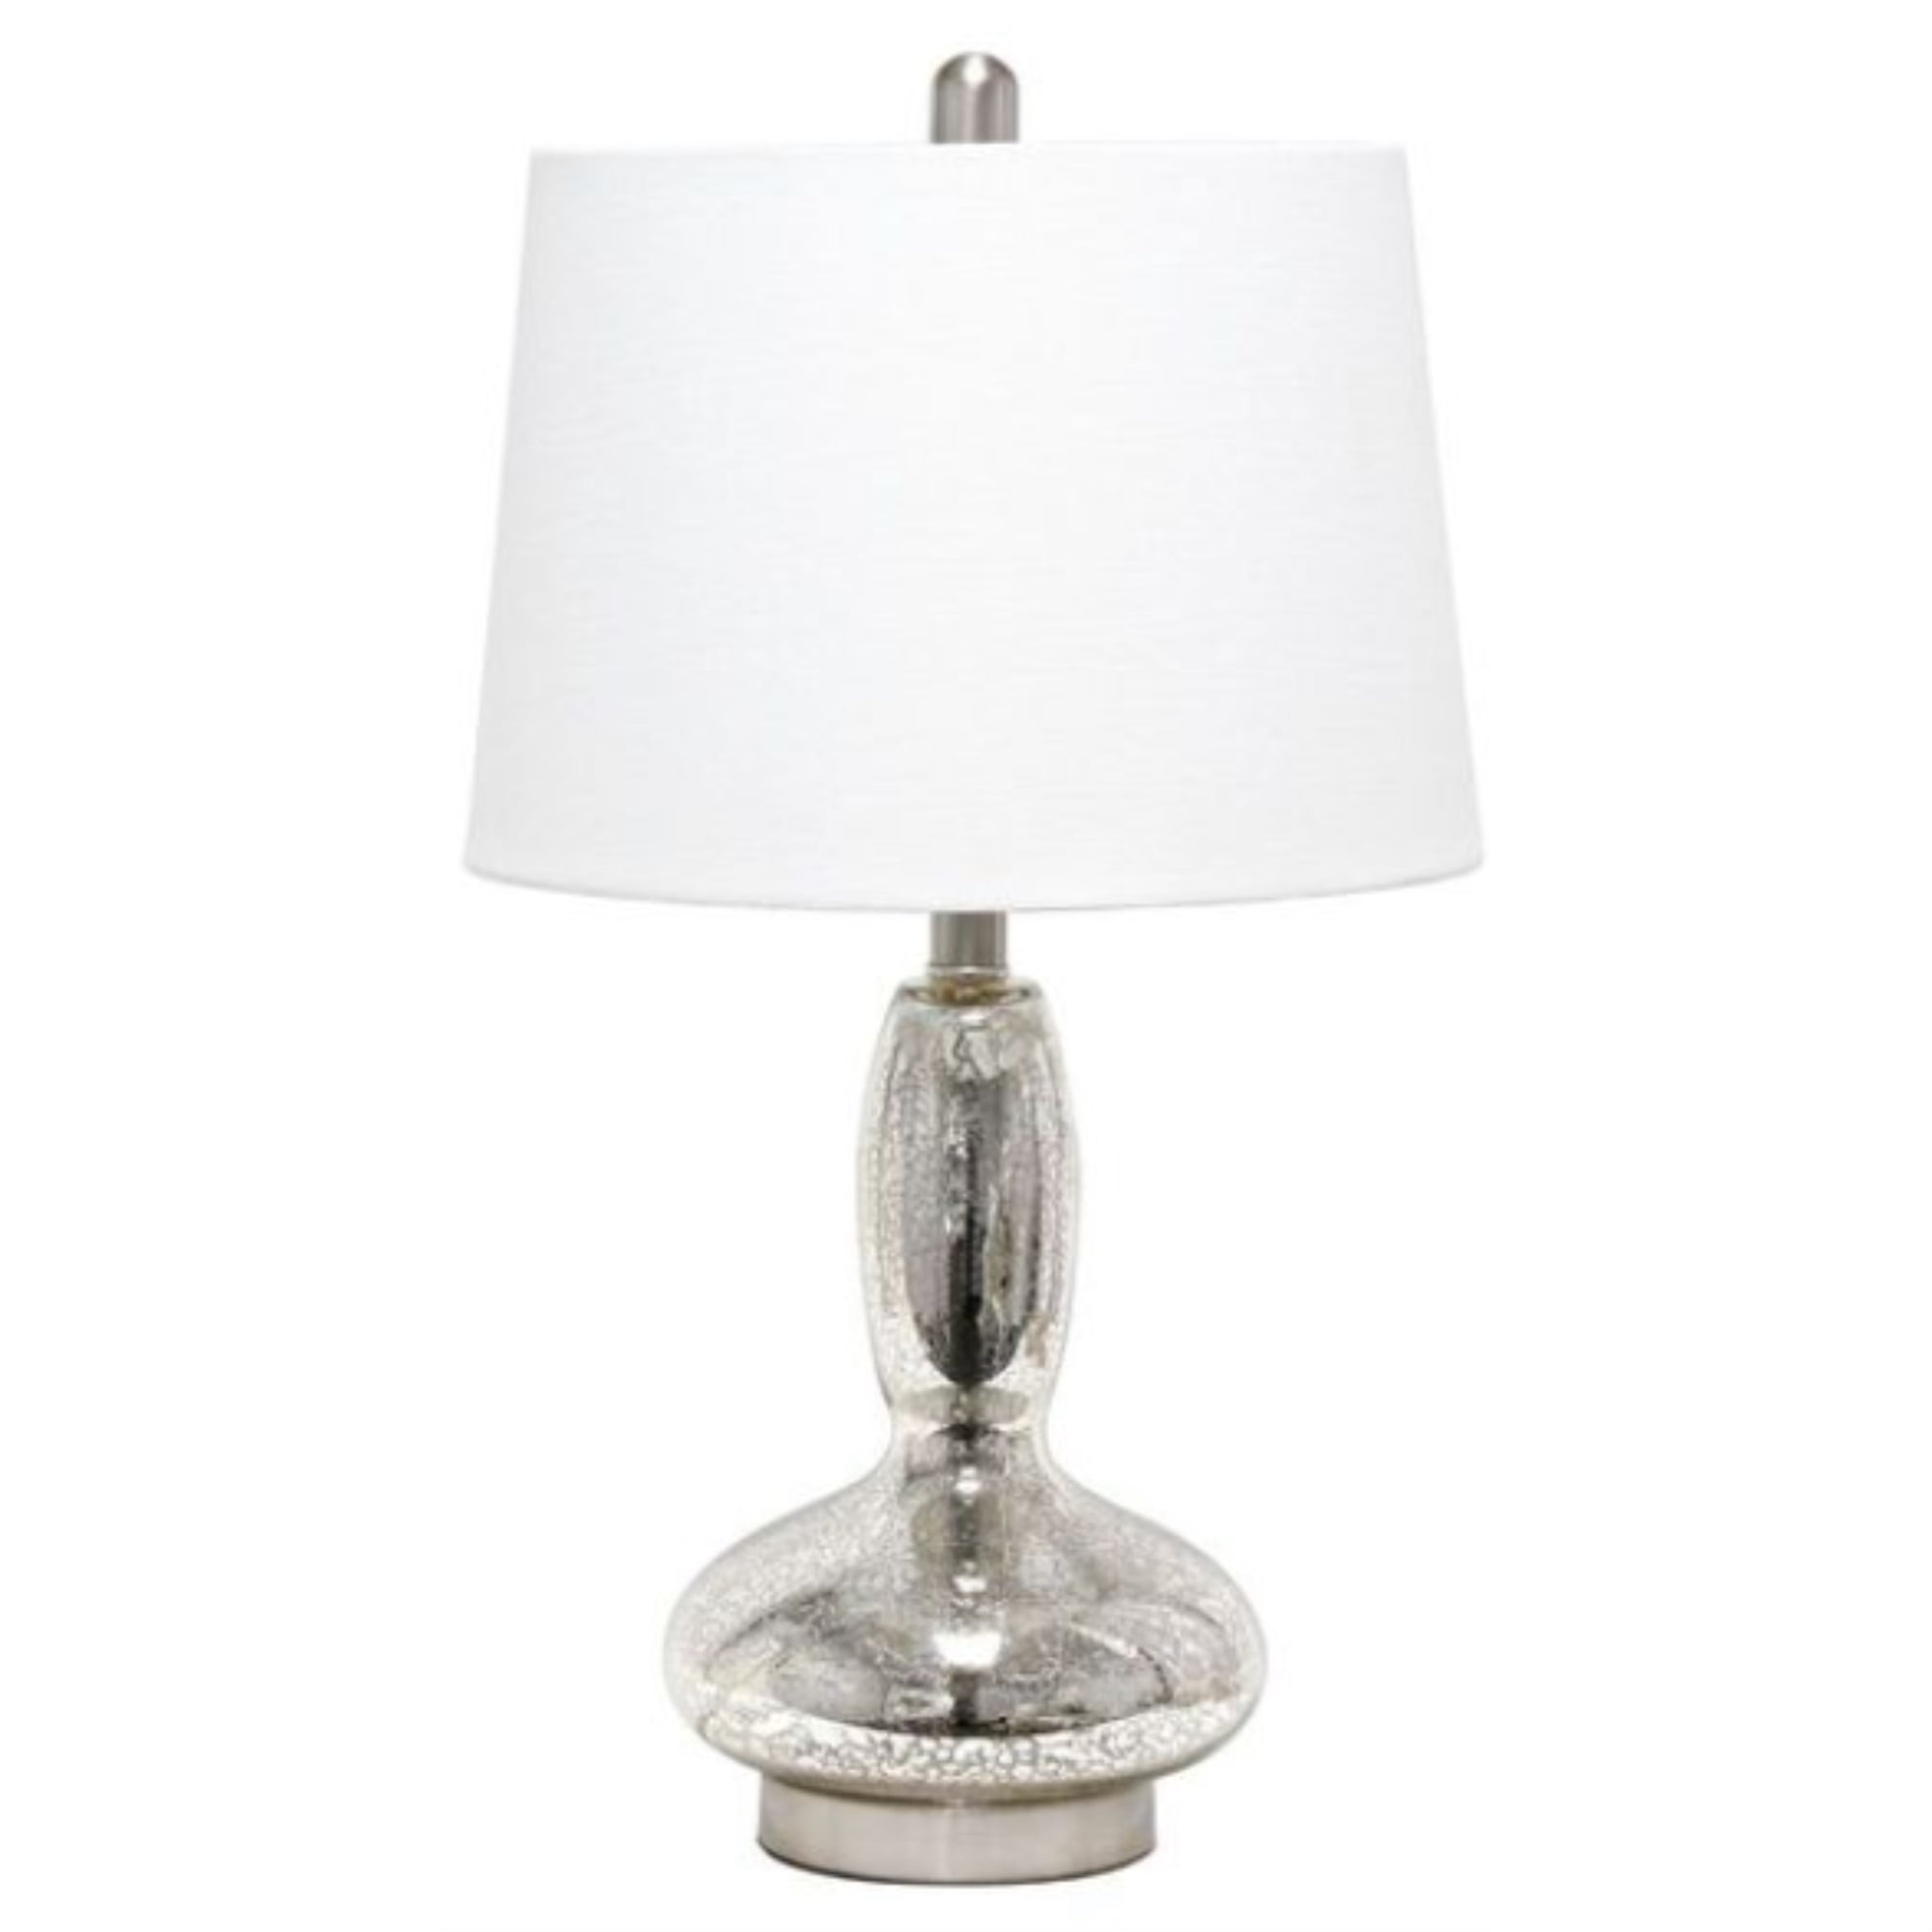 Lalia Home Glass Dollop Table Lamp with White Fabric Shade, Mercury